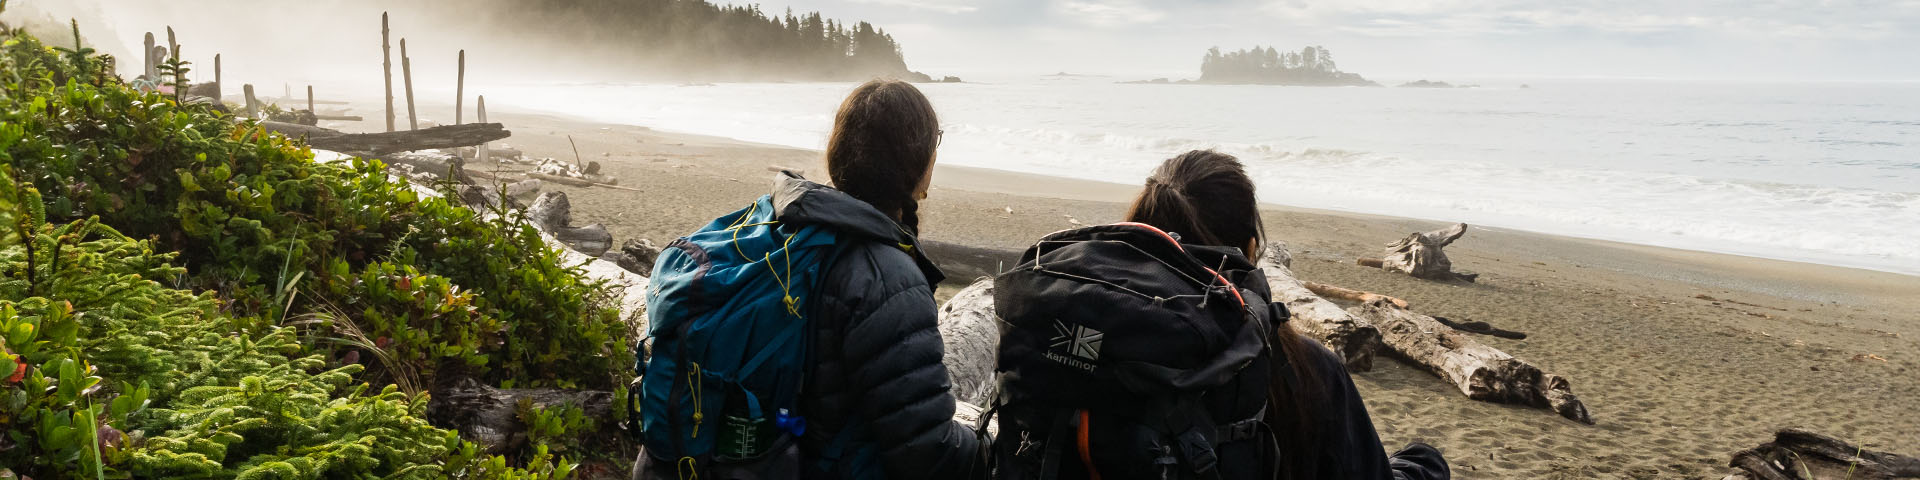 Two hikers looking at a beach